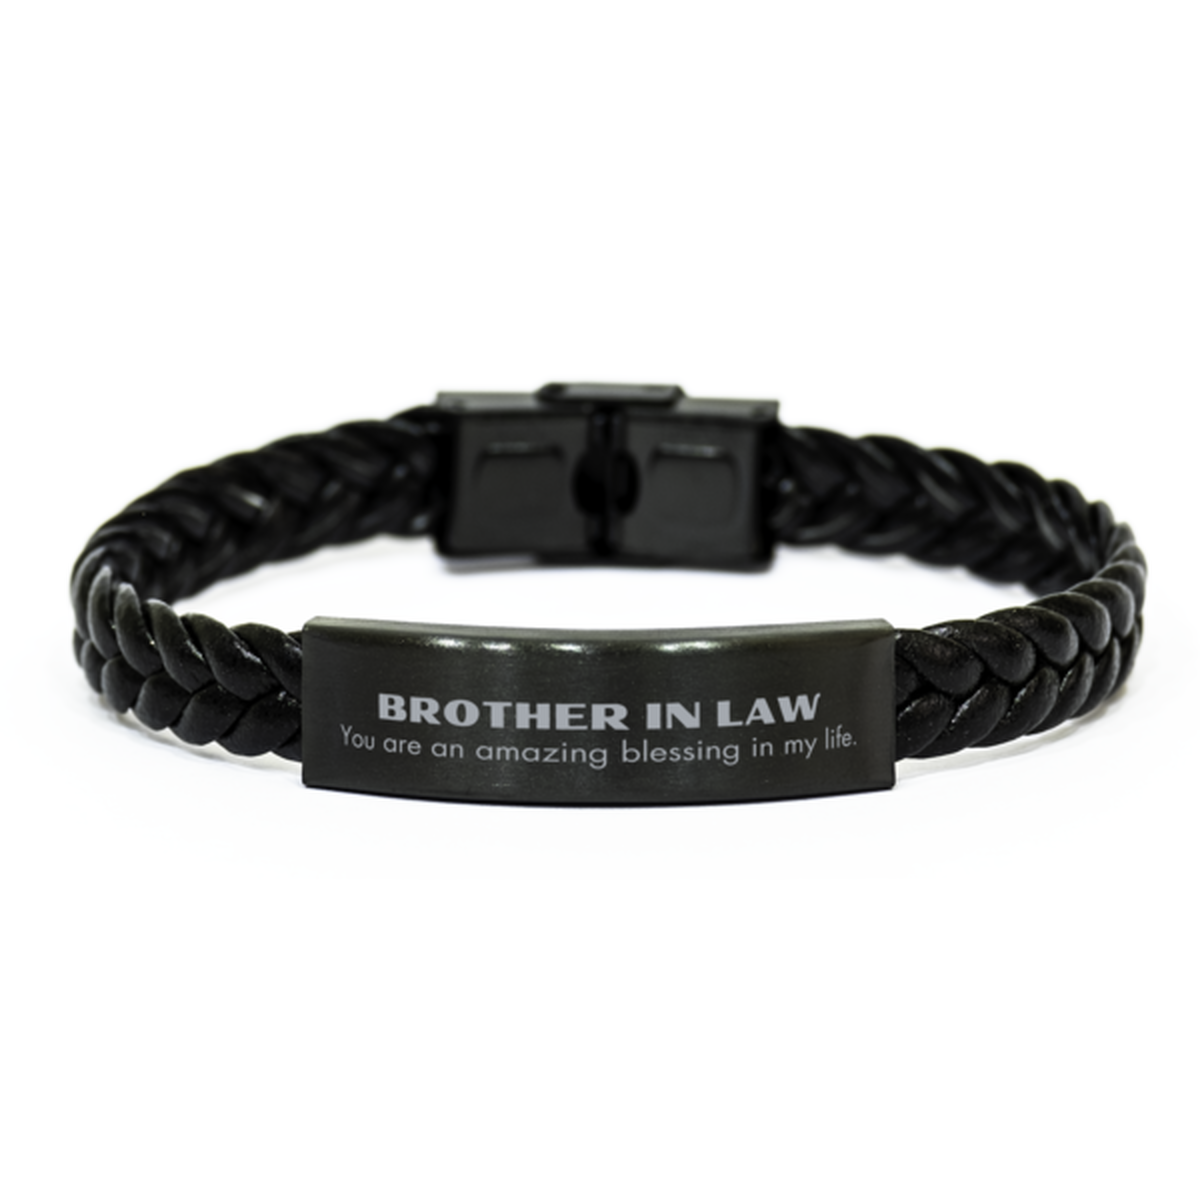 Brother In Law Braided Leather Bracelet, You are an amazing blessing in my life, Thank You Gifts For Brother In Law, Inspirational Birthday Christmas Unique Gifts For Brother In Law